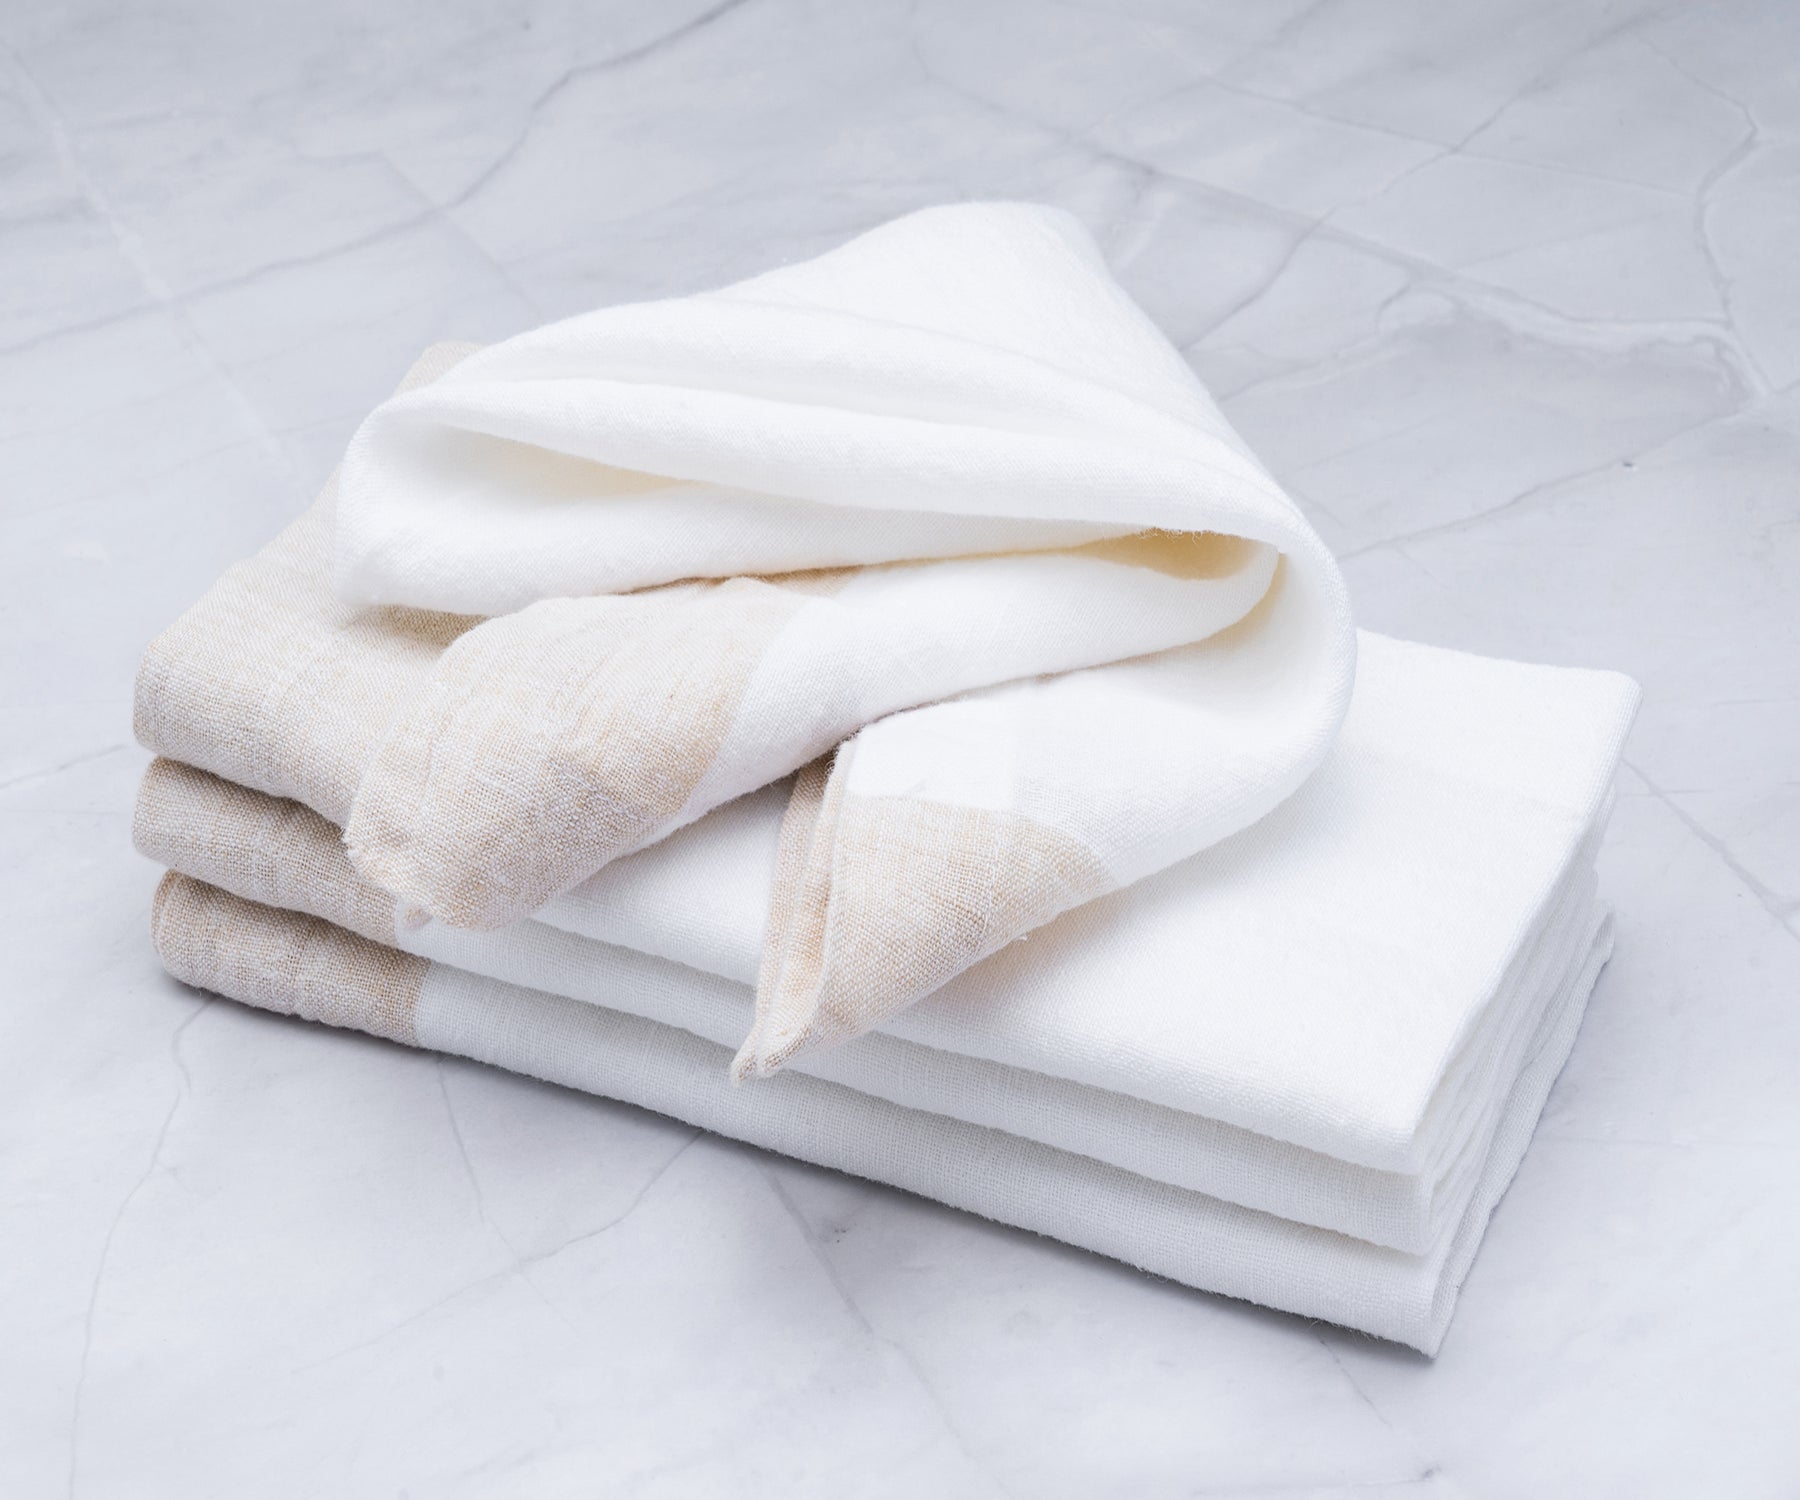 Purchase linen napkins in bulk for convenience and savings, ideal for large gatherings and events.